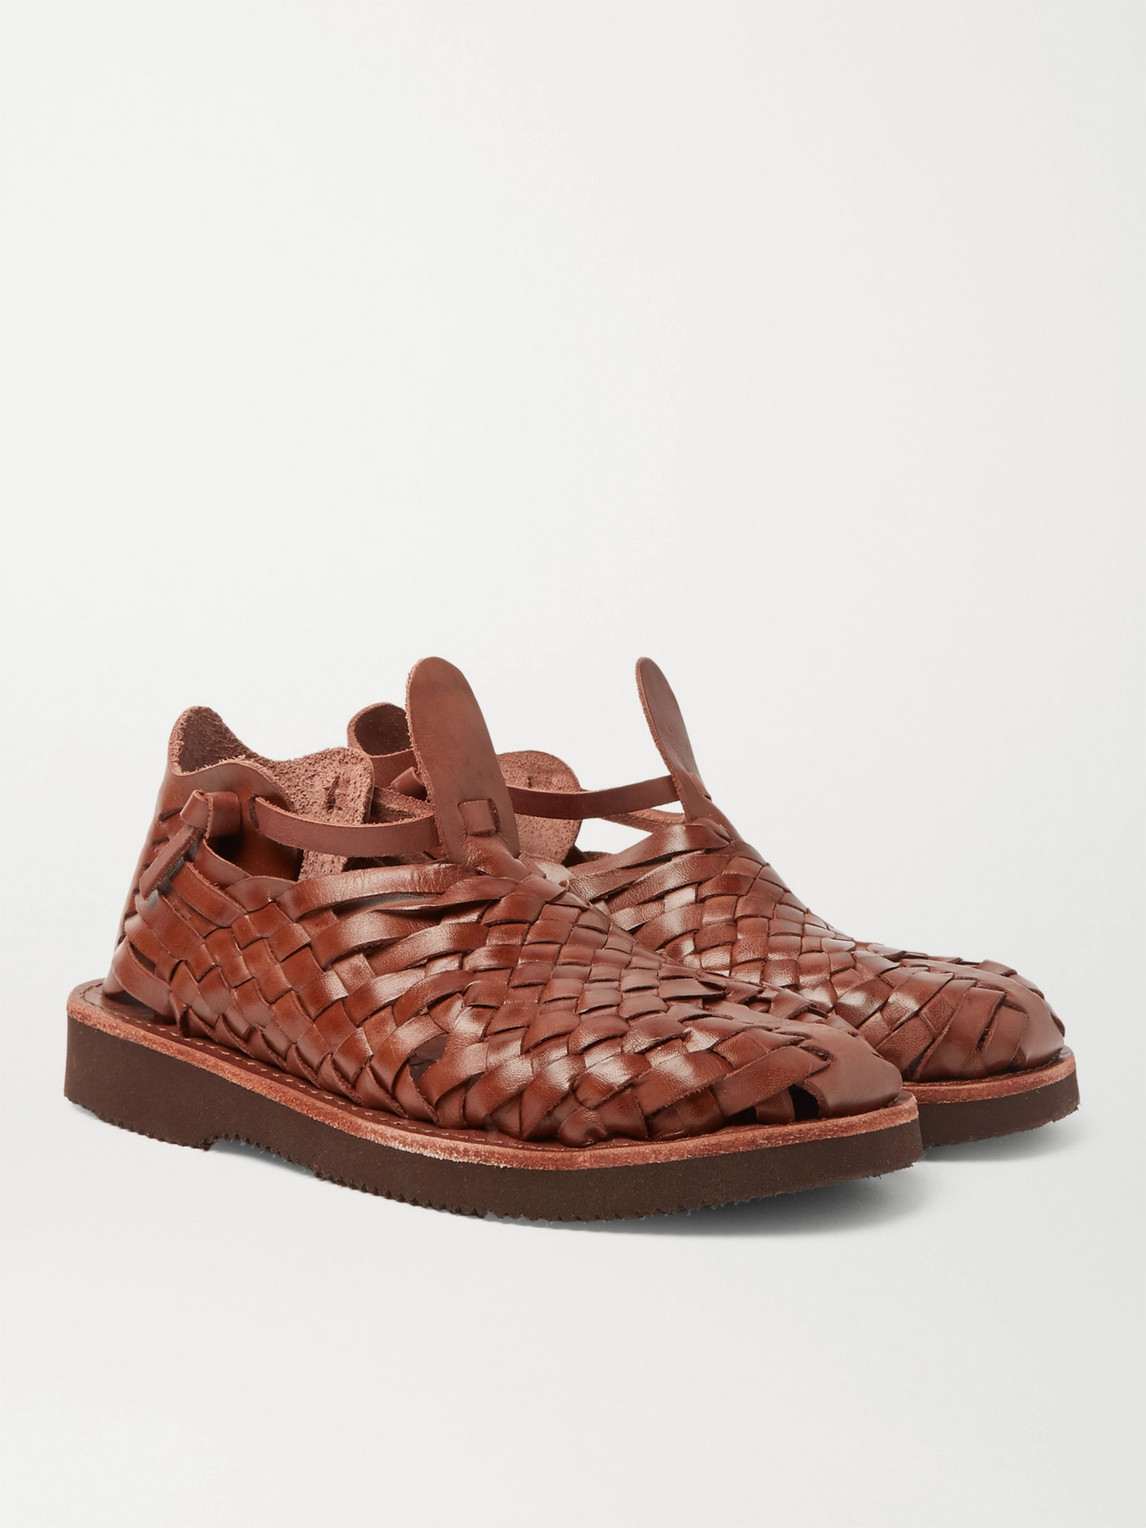 Yuketen Crus Woven Leather Sandals In Brown